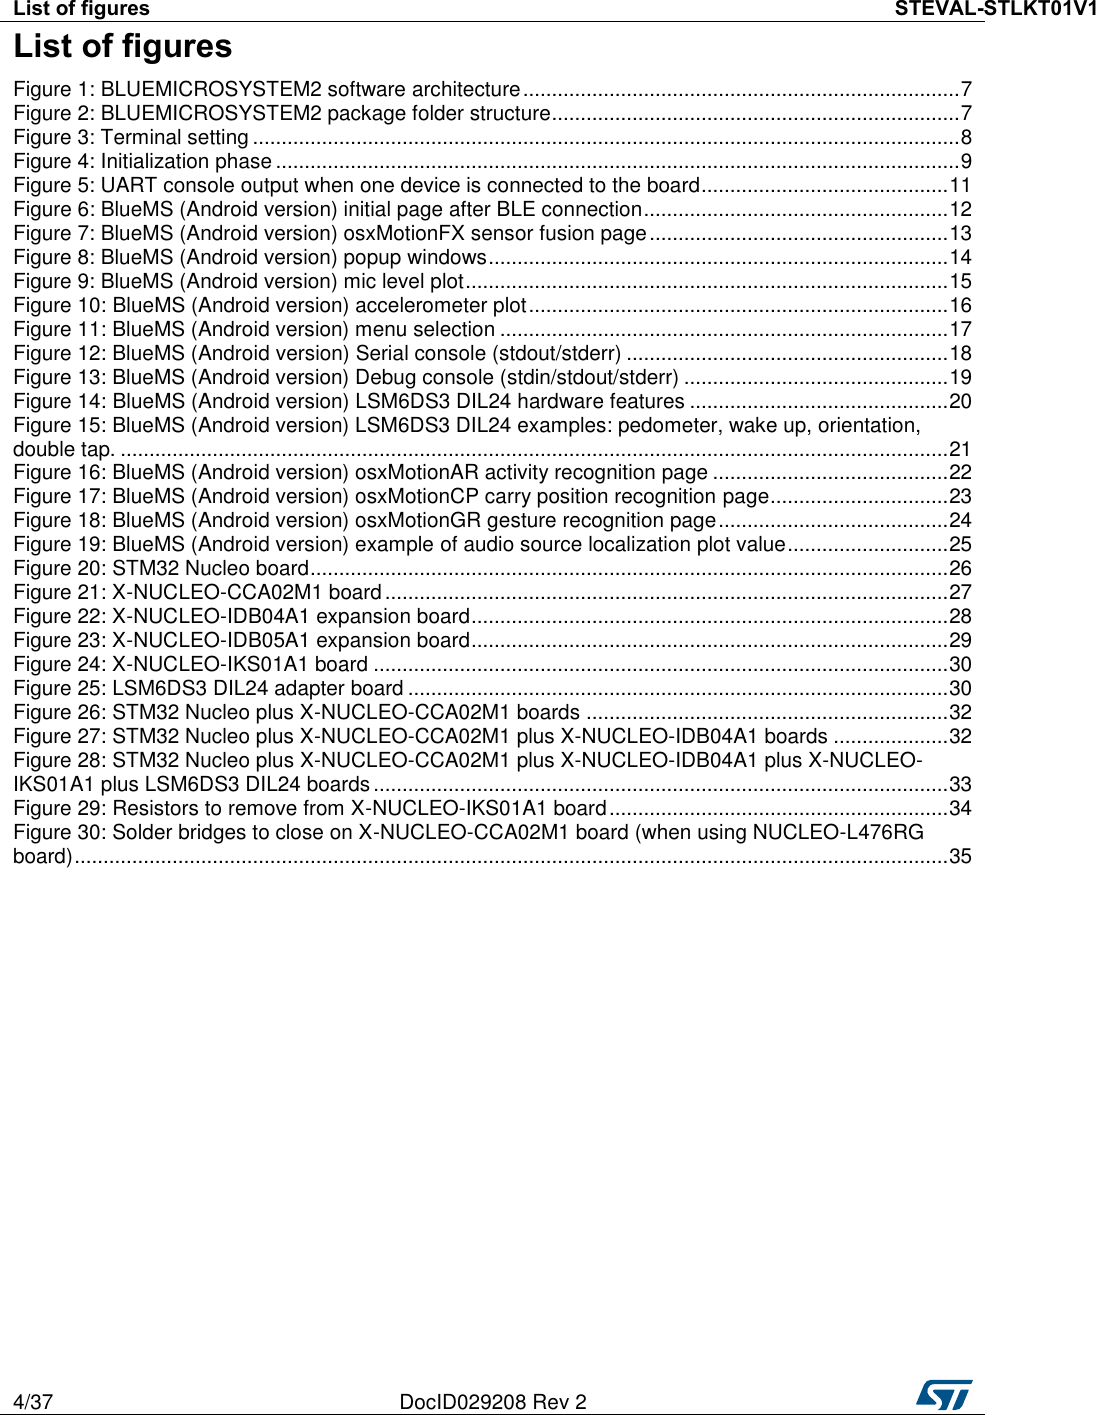 List of figures STEVAL-STLKT01V1 4/37 DocID029208 Rev 2   List of figures Figure 1: BLUEMICROSYSTEM2 software architecture ............................................................................ 7 Figure 2: BLUEMICROSYSTEM2 package folder structure ....................................................................... 7 Figure 3: Terminal setting ........................................................................................................................... 8 Figure 4: Initialization phase ....................................................................................................................... 9 Figure 5: UART console output when one device is connected to the board........................................... 11 Figure 6: BlueMS (Android version) initial page after BLE connection ..................................................... 12 Figure 7: BlueMS (Android version) osxMotionFX sensor fusion page .................................................... 13 Figure 8: BlueMS (Android version) popup windows ................................................................................ 14 Figure 9: BlueMS (Android version) mic level plot .................................................................................... 15 Figure 10: BlueMS (Android version) accelerometer plot ......................................................................... 16 Figure 11: BlueMS (Android version) menu selection .............................................................................. 17 Figure 12: BlueMS (Android version) Serial console (stdout/stderr) ........................................................ 18 Figure 13: BlueMS (Android version) Debug console (stdin/stdout/stderr) .............................................. 19 Figure 14: BlueMS (Android version) LSM6DS3 DIL24 hardware features ............................................. 20 Figure 15: BlueMS (Android version) LSM6DS3 DIL24 examples: pedometer, wake up, orientation, double tap. ................................................................................................................................................ 21 Figure 16: BlueMS (Android version) osxMotionAR activity recognition page ......................................... 22 Figure 17: BlueMS (Android version) osxMotionCP carry position recognition page ............................... 23 Figure 18: BlueMS (Android version) osxMotionGR gesture recognition page ........................................ 24 Figure 19: BlueMS (Android version) example of audio source localization plot value ............................ 25 Figure 20: STM32 Nucleo board ............................................................................................................... 26 Figure 21: X-NUCLEO-CCA02M1 board .................................................................................................. 27 Figure 22: X-NUCLEO-IDB04A1 expansion board ................................................................................... 28 Figure 23: X-NUCLEO-IDB05A1 expansion board ................................................................................... 29 Figure 24: X-NUCLEO-IKS01A1 board .................................................................................................... 30 Figure 25: LSM6DS3 DIL24 adapter board .............................................................................................. 30 Figure 26: STM32 Nucleo plus X-NUCLEO-CCA02M1 boards ............................................................... 32 Figure 27: STM32 Nucleo plus X-NUCLEO-CCA02M1 plus X-NUCLEO-IDB04A1 boards .................... 32 Figure 28: STM32 Nucleo plus X-NUCLEO-CCA02M1 plus X-NUCLEO-IDB04A1 plus X-NUCLEO-IKS01A1 plus LSM6DS3 DIL24 boards .................................................................................................... 33 Figure 29: Resistors to remove from X-NUCLEO-IKS01A1 board ........................................................... 34 Figure 30: Solder bridges to close on X-NUCLEO-CCA02M1 board (when using NUCLEO-L476RG board) ........................................................................................................................................................ 35  